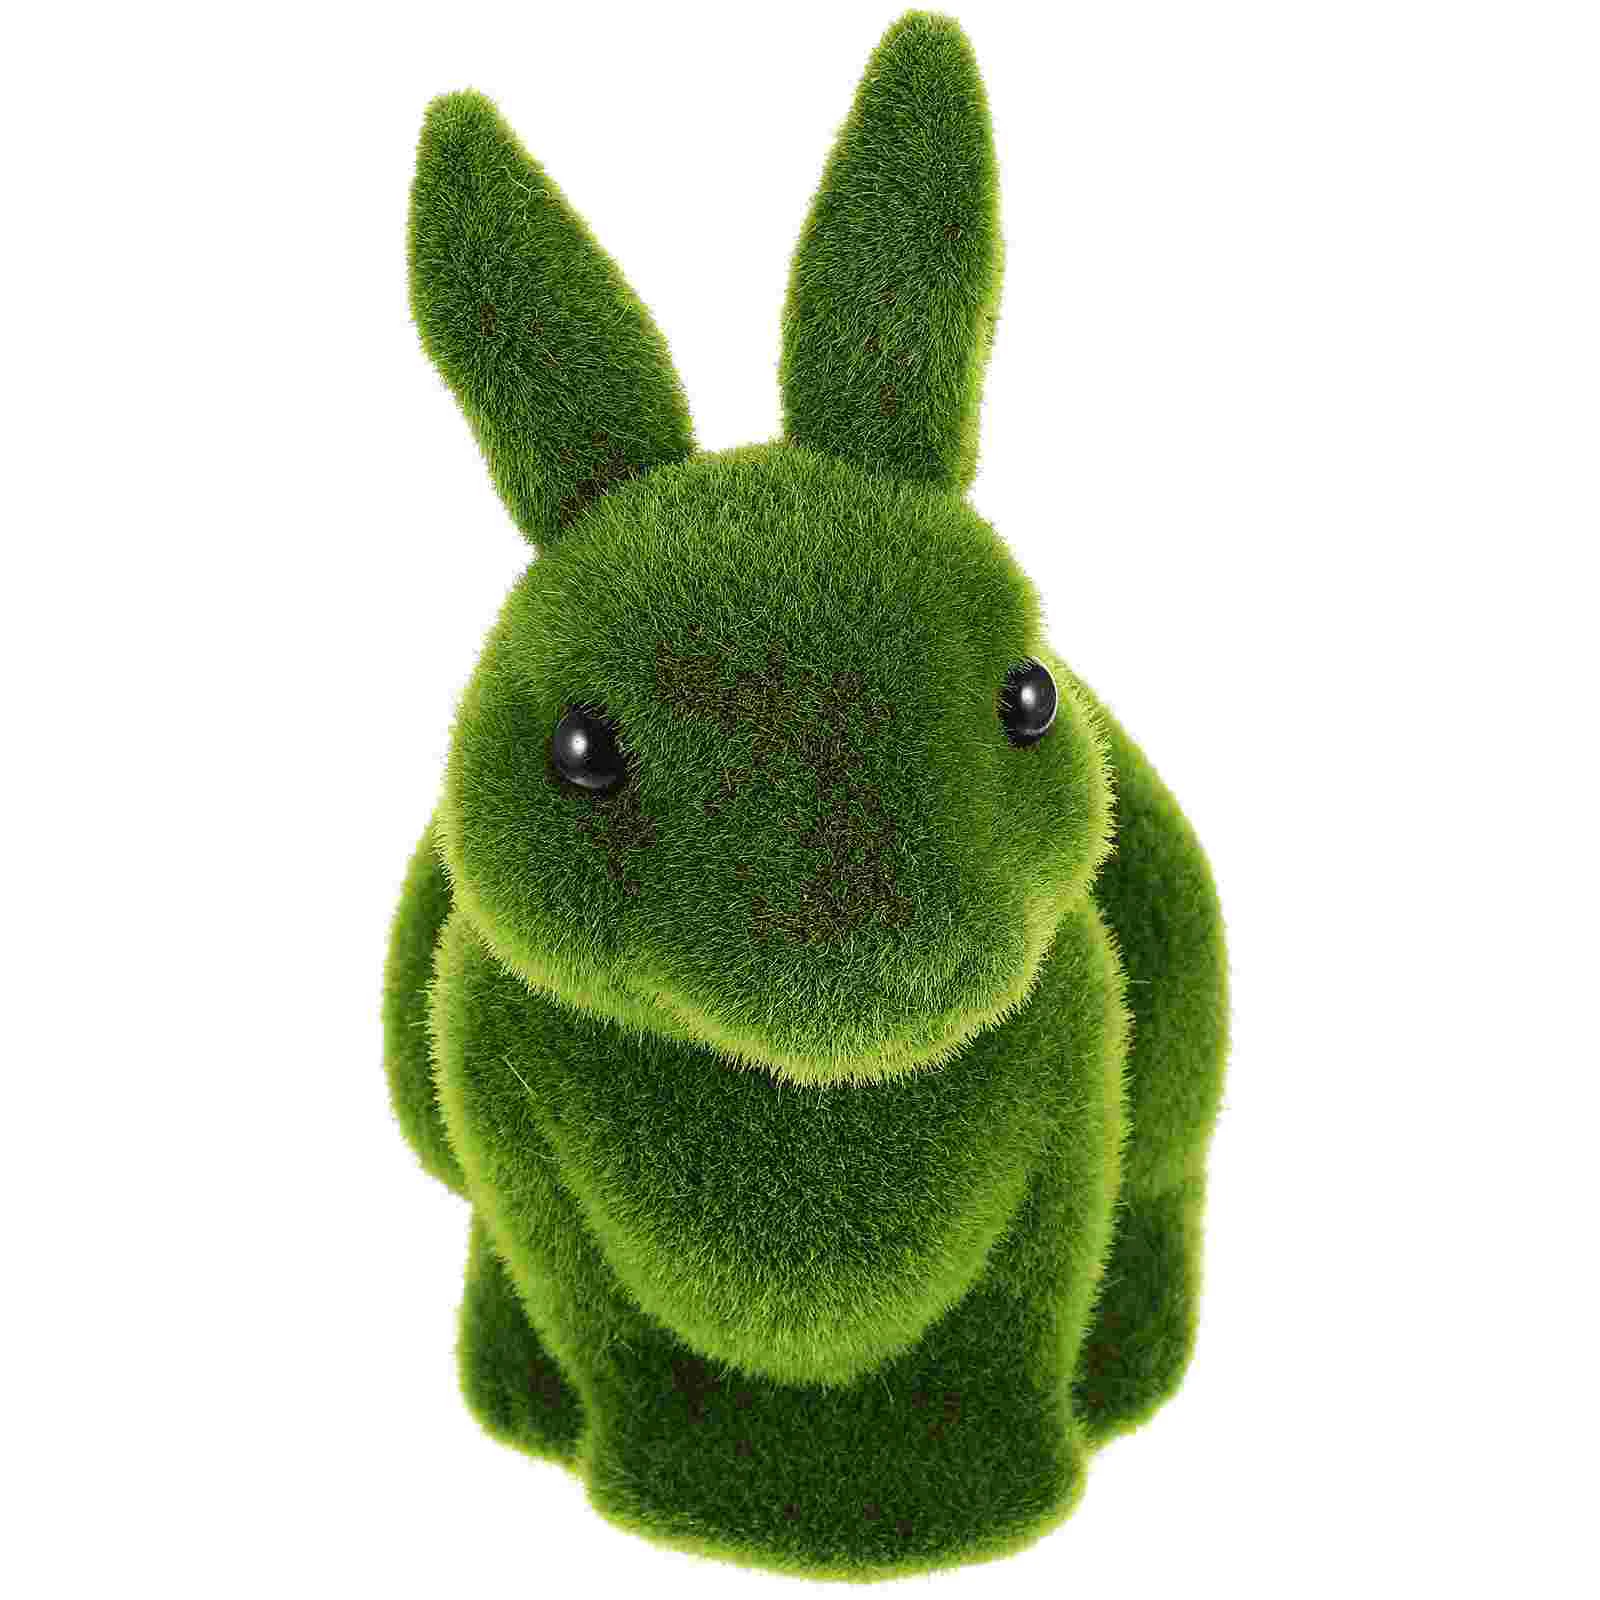 

Rabbit Moss Bunny Flocking Grass Figurines Flocked Ornament Animal Easter Artificial Decoration Faux Statue Statues Standing